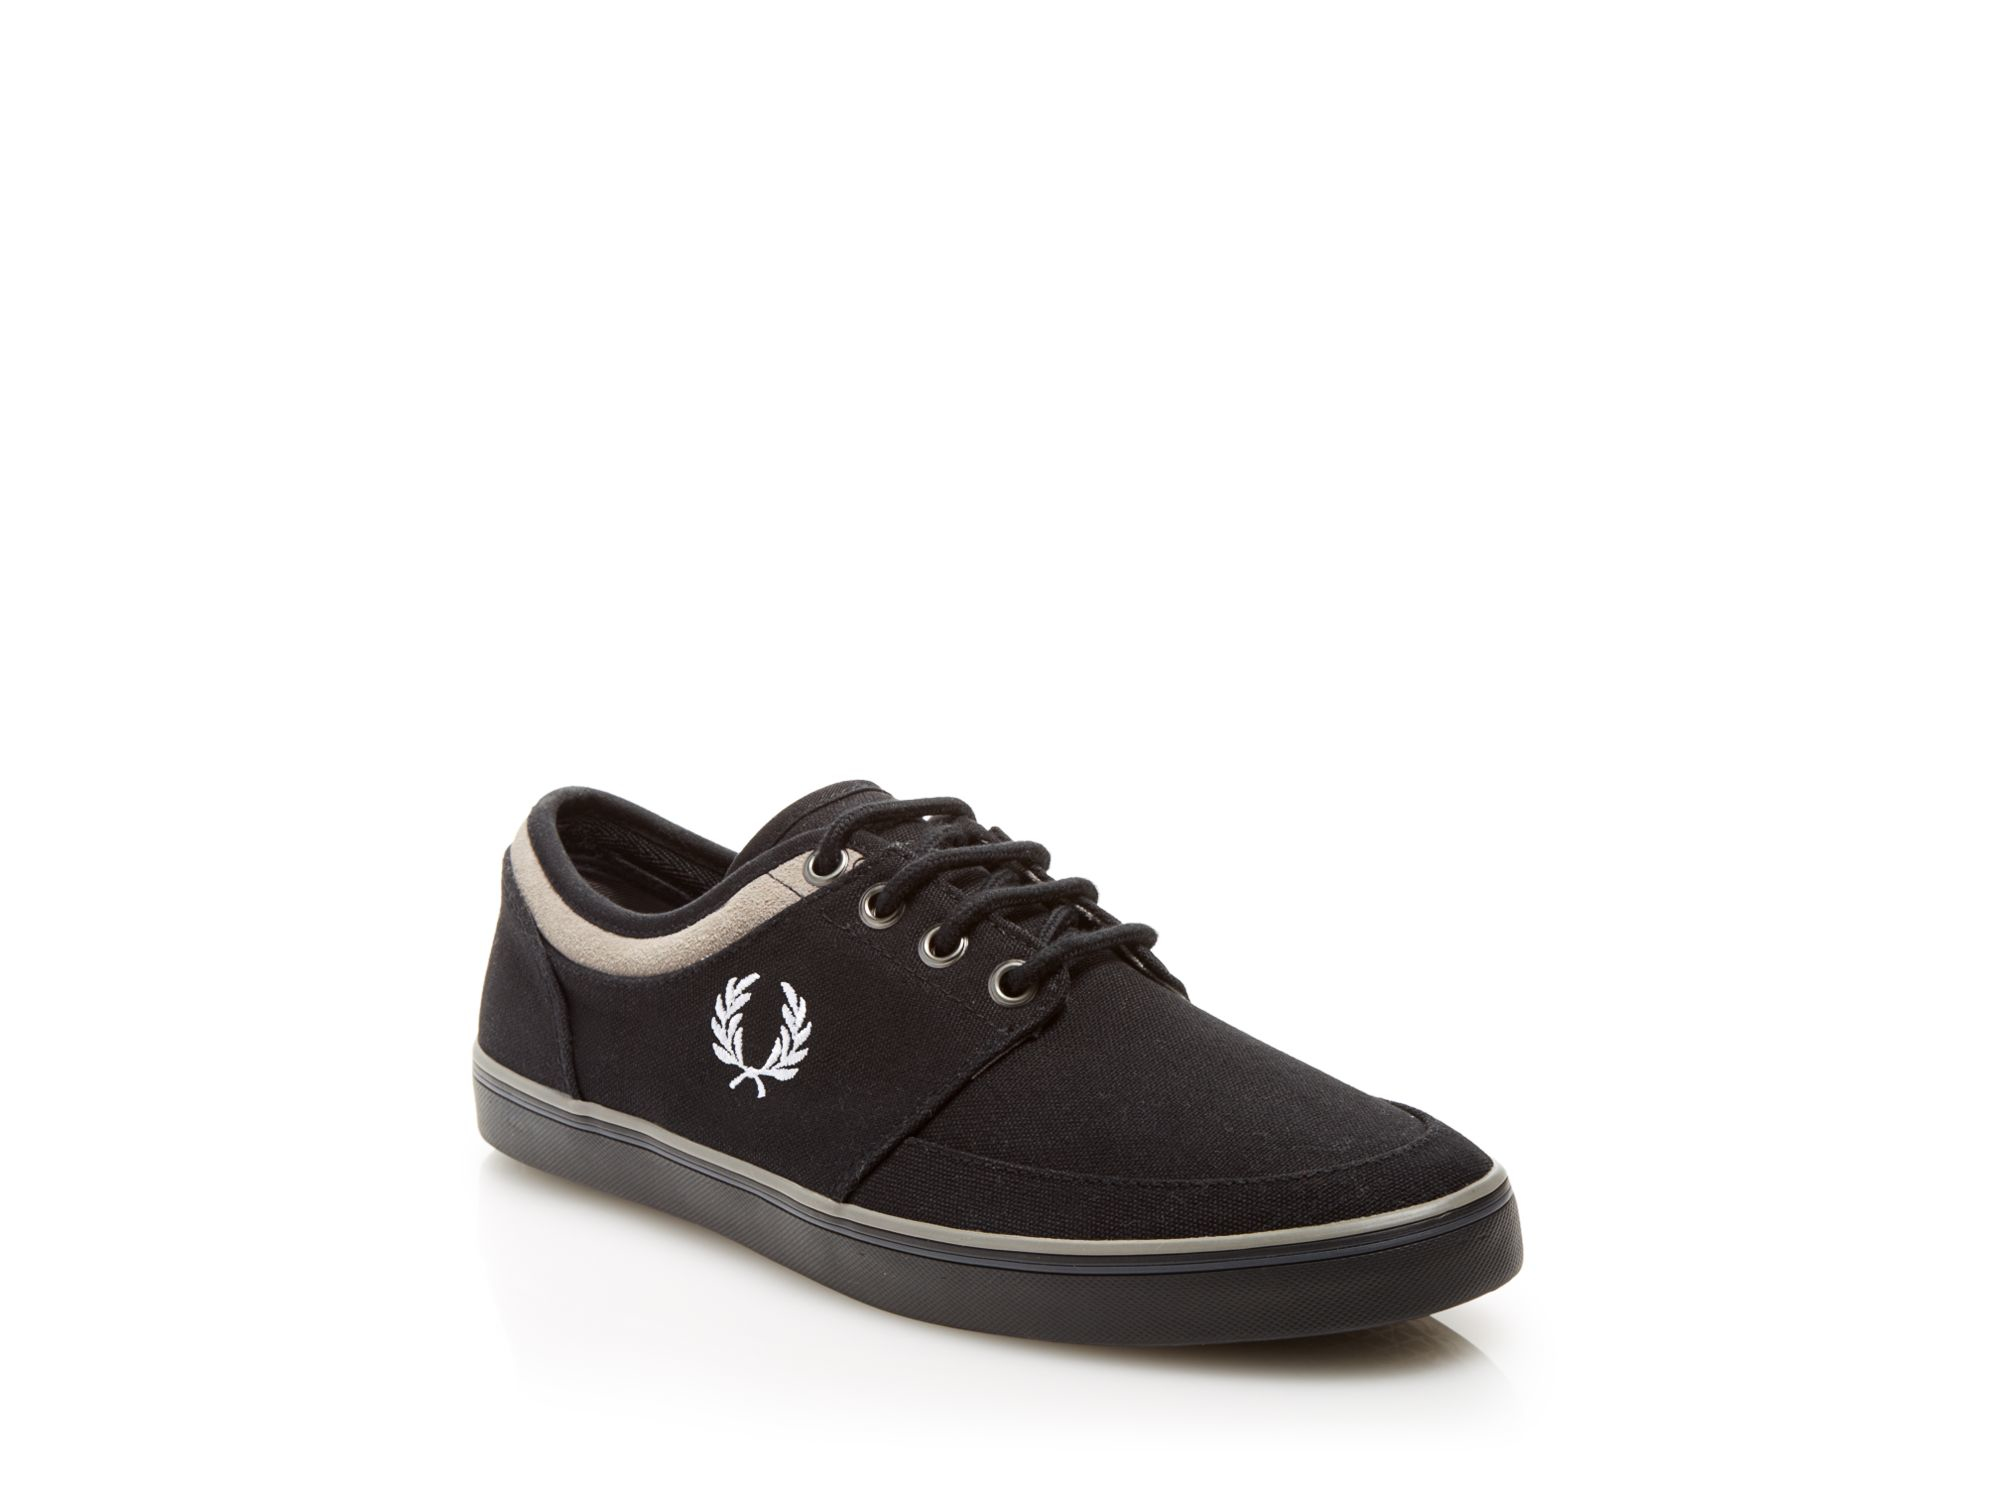 Lyst - Fred Perry Stratford Canvas Sneakers in Black for Men